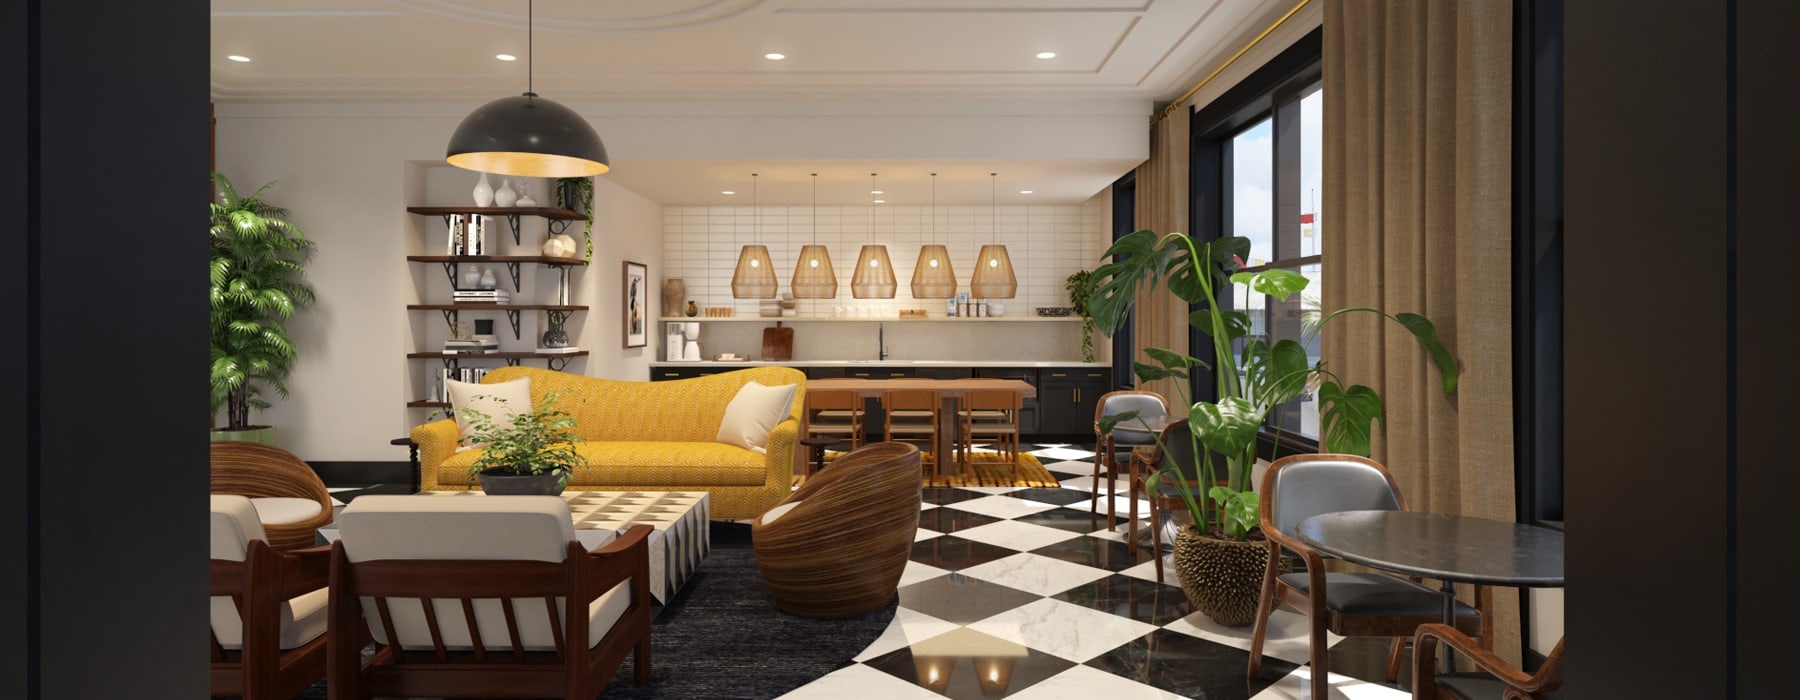 rendering of open living concept showing living, dining, and kitchen combined with bright-natural lighting and easy access in between areas